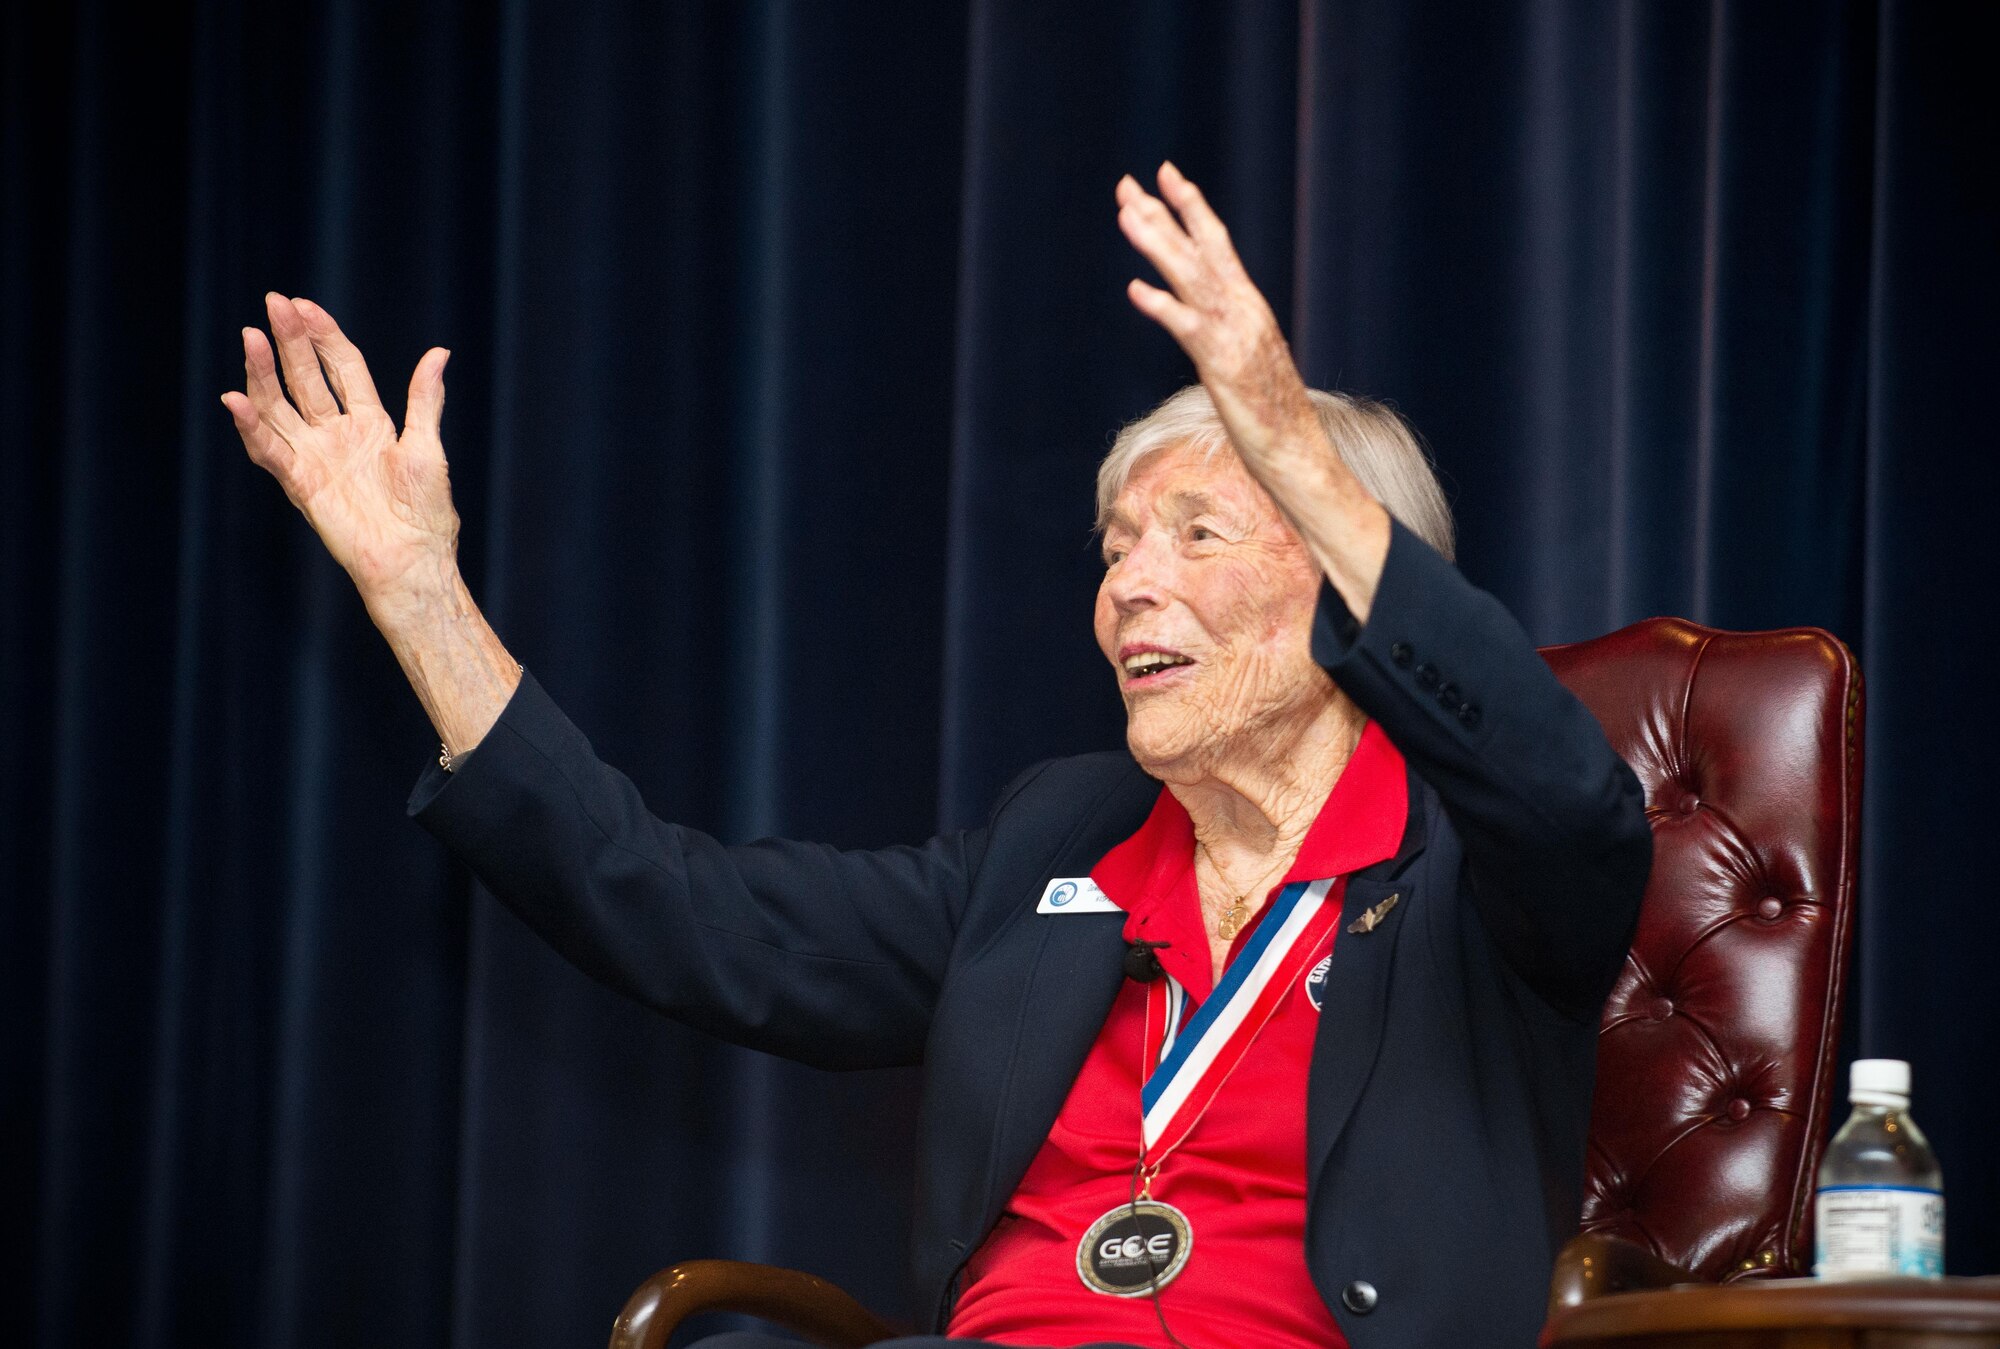 Dawn Seymour, 2016 Gathering of Eagles honoree, speaks about her time as a member of the Women Airforce Service Pilots (WASP), during the Air Command and Staff College’s 2016 Gathering of Eagles event, June 1, 2016, Maxwell Air Force Base, Ala. During her service in WASP, Seymour flew over 700 hours in the B-17 and trained gunners for the D-Day invasion and duty in the Pacific Theater. She was awarded the Congressional Gold Medal in 2010. (U.S. Air Force photo/ Donna Burnett)